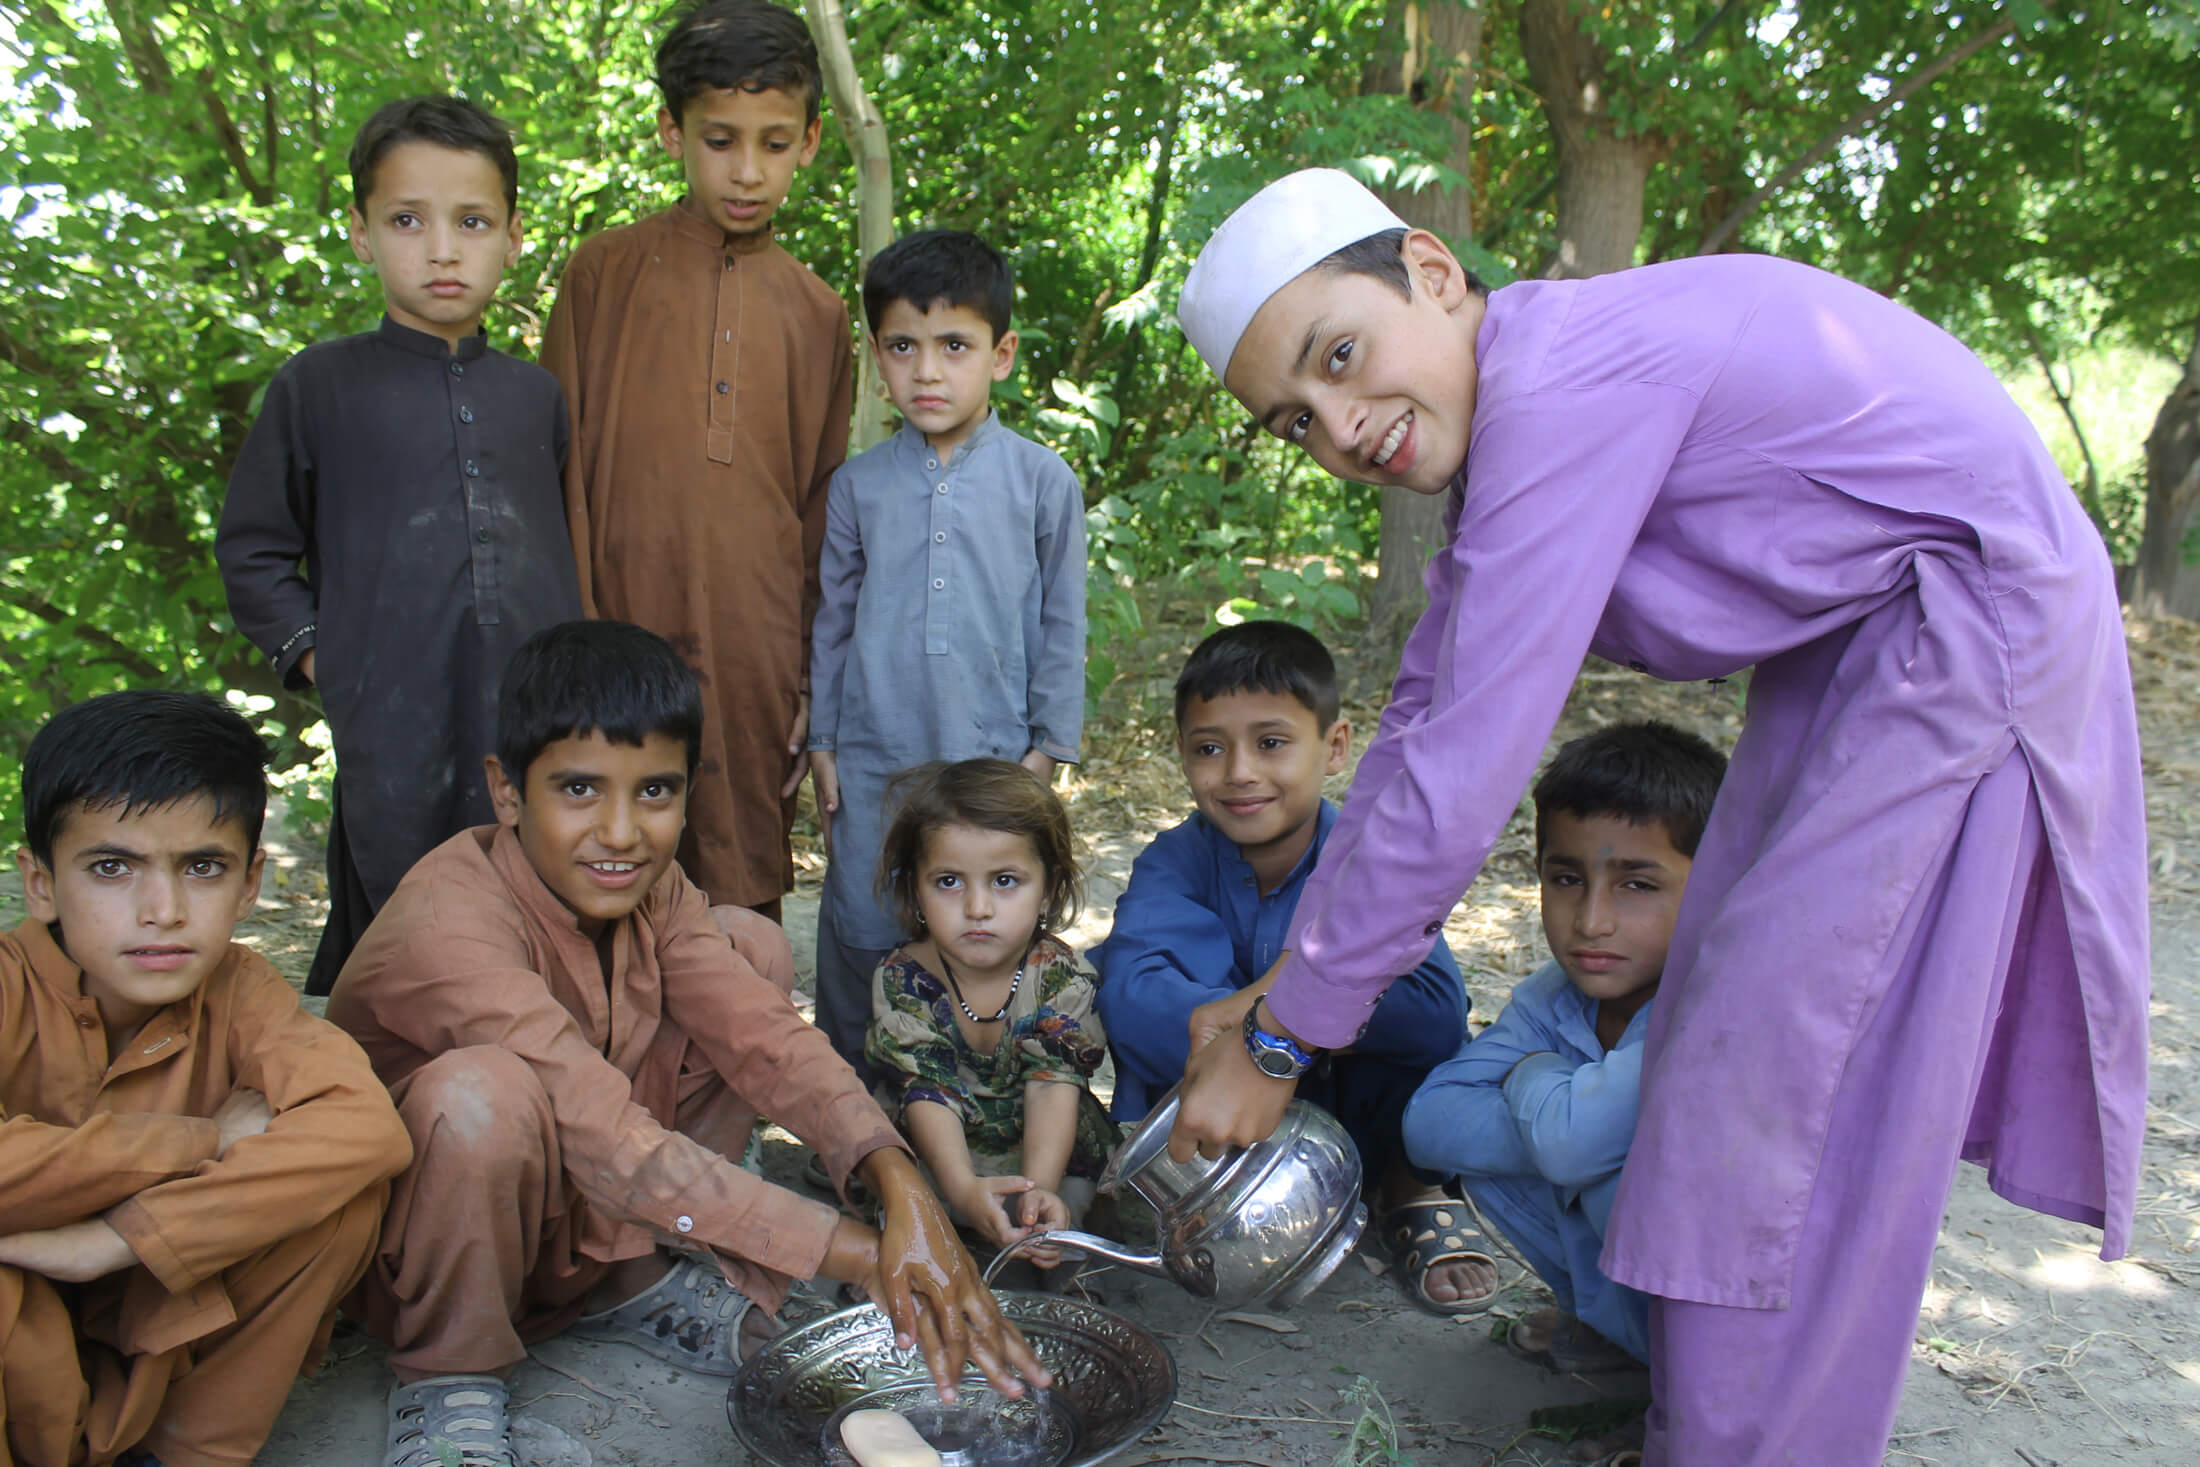 After learning about the importance of handwashing to prevent waterborne diseases like cholera, children in Afghanistan practice washing their hands.